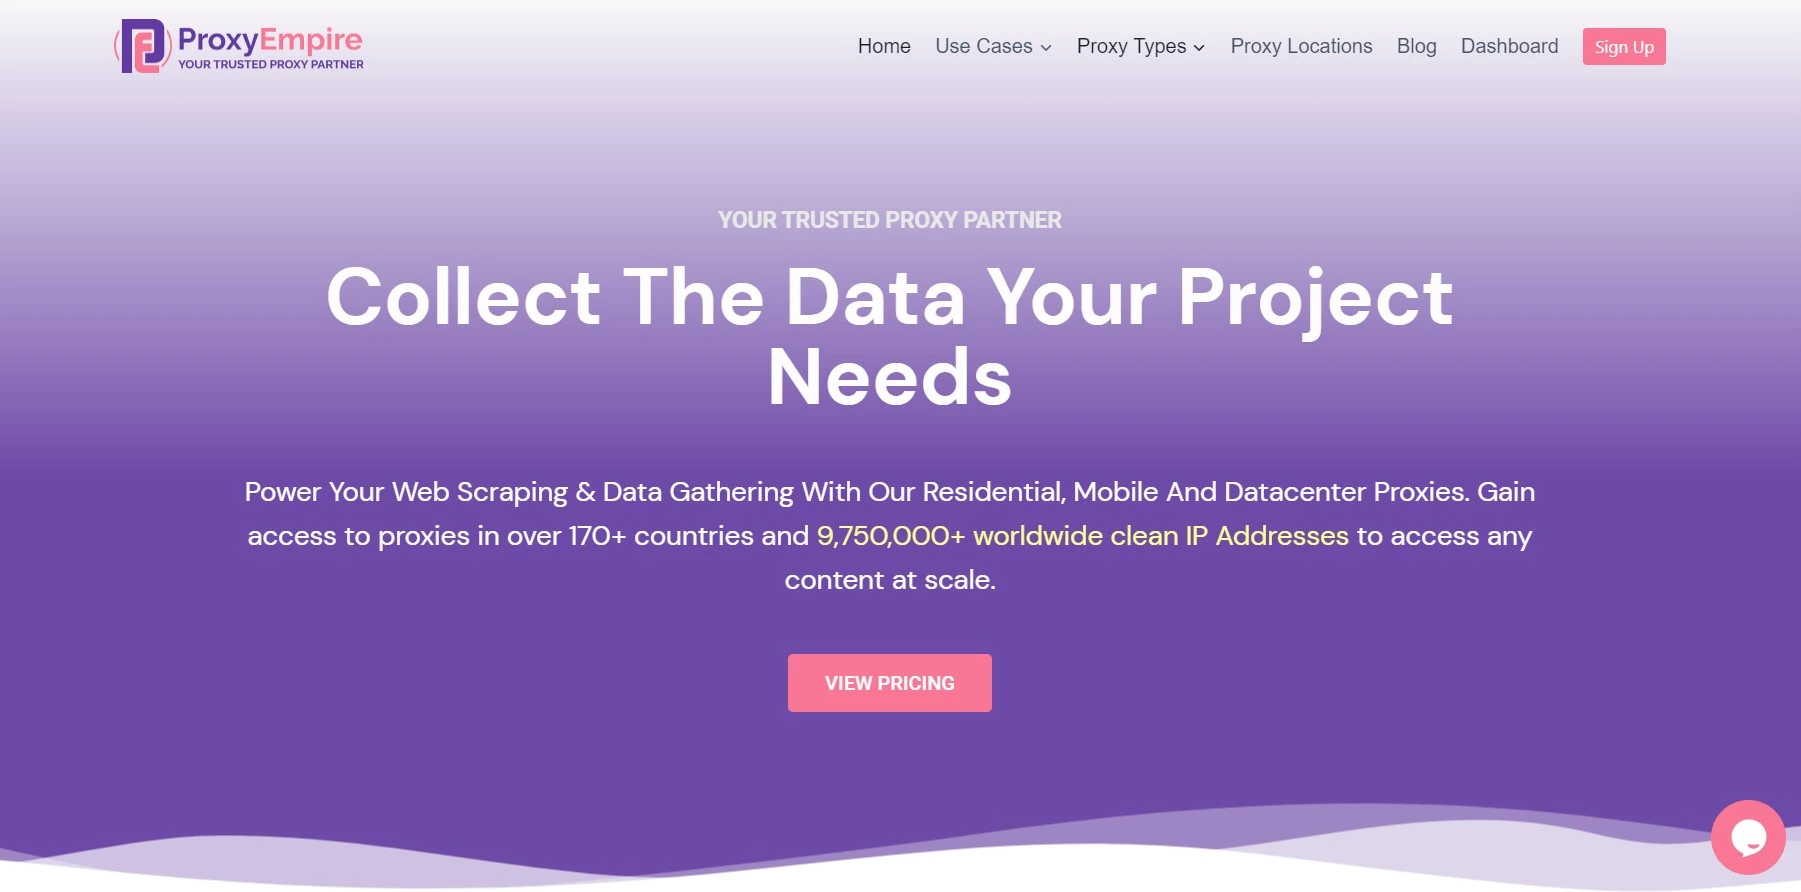 Proxy empire provides datacenter proxies